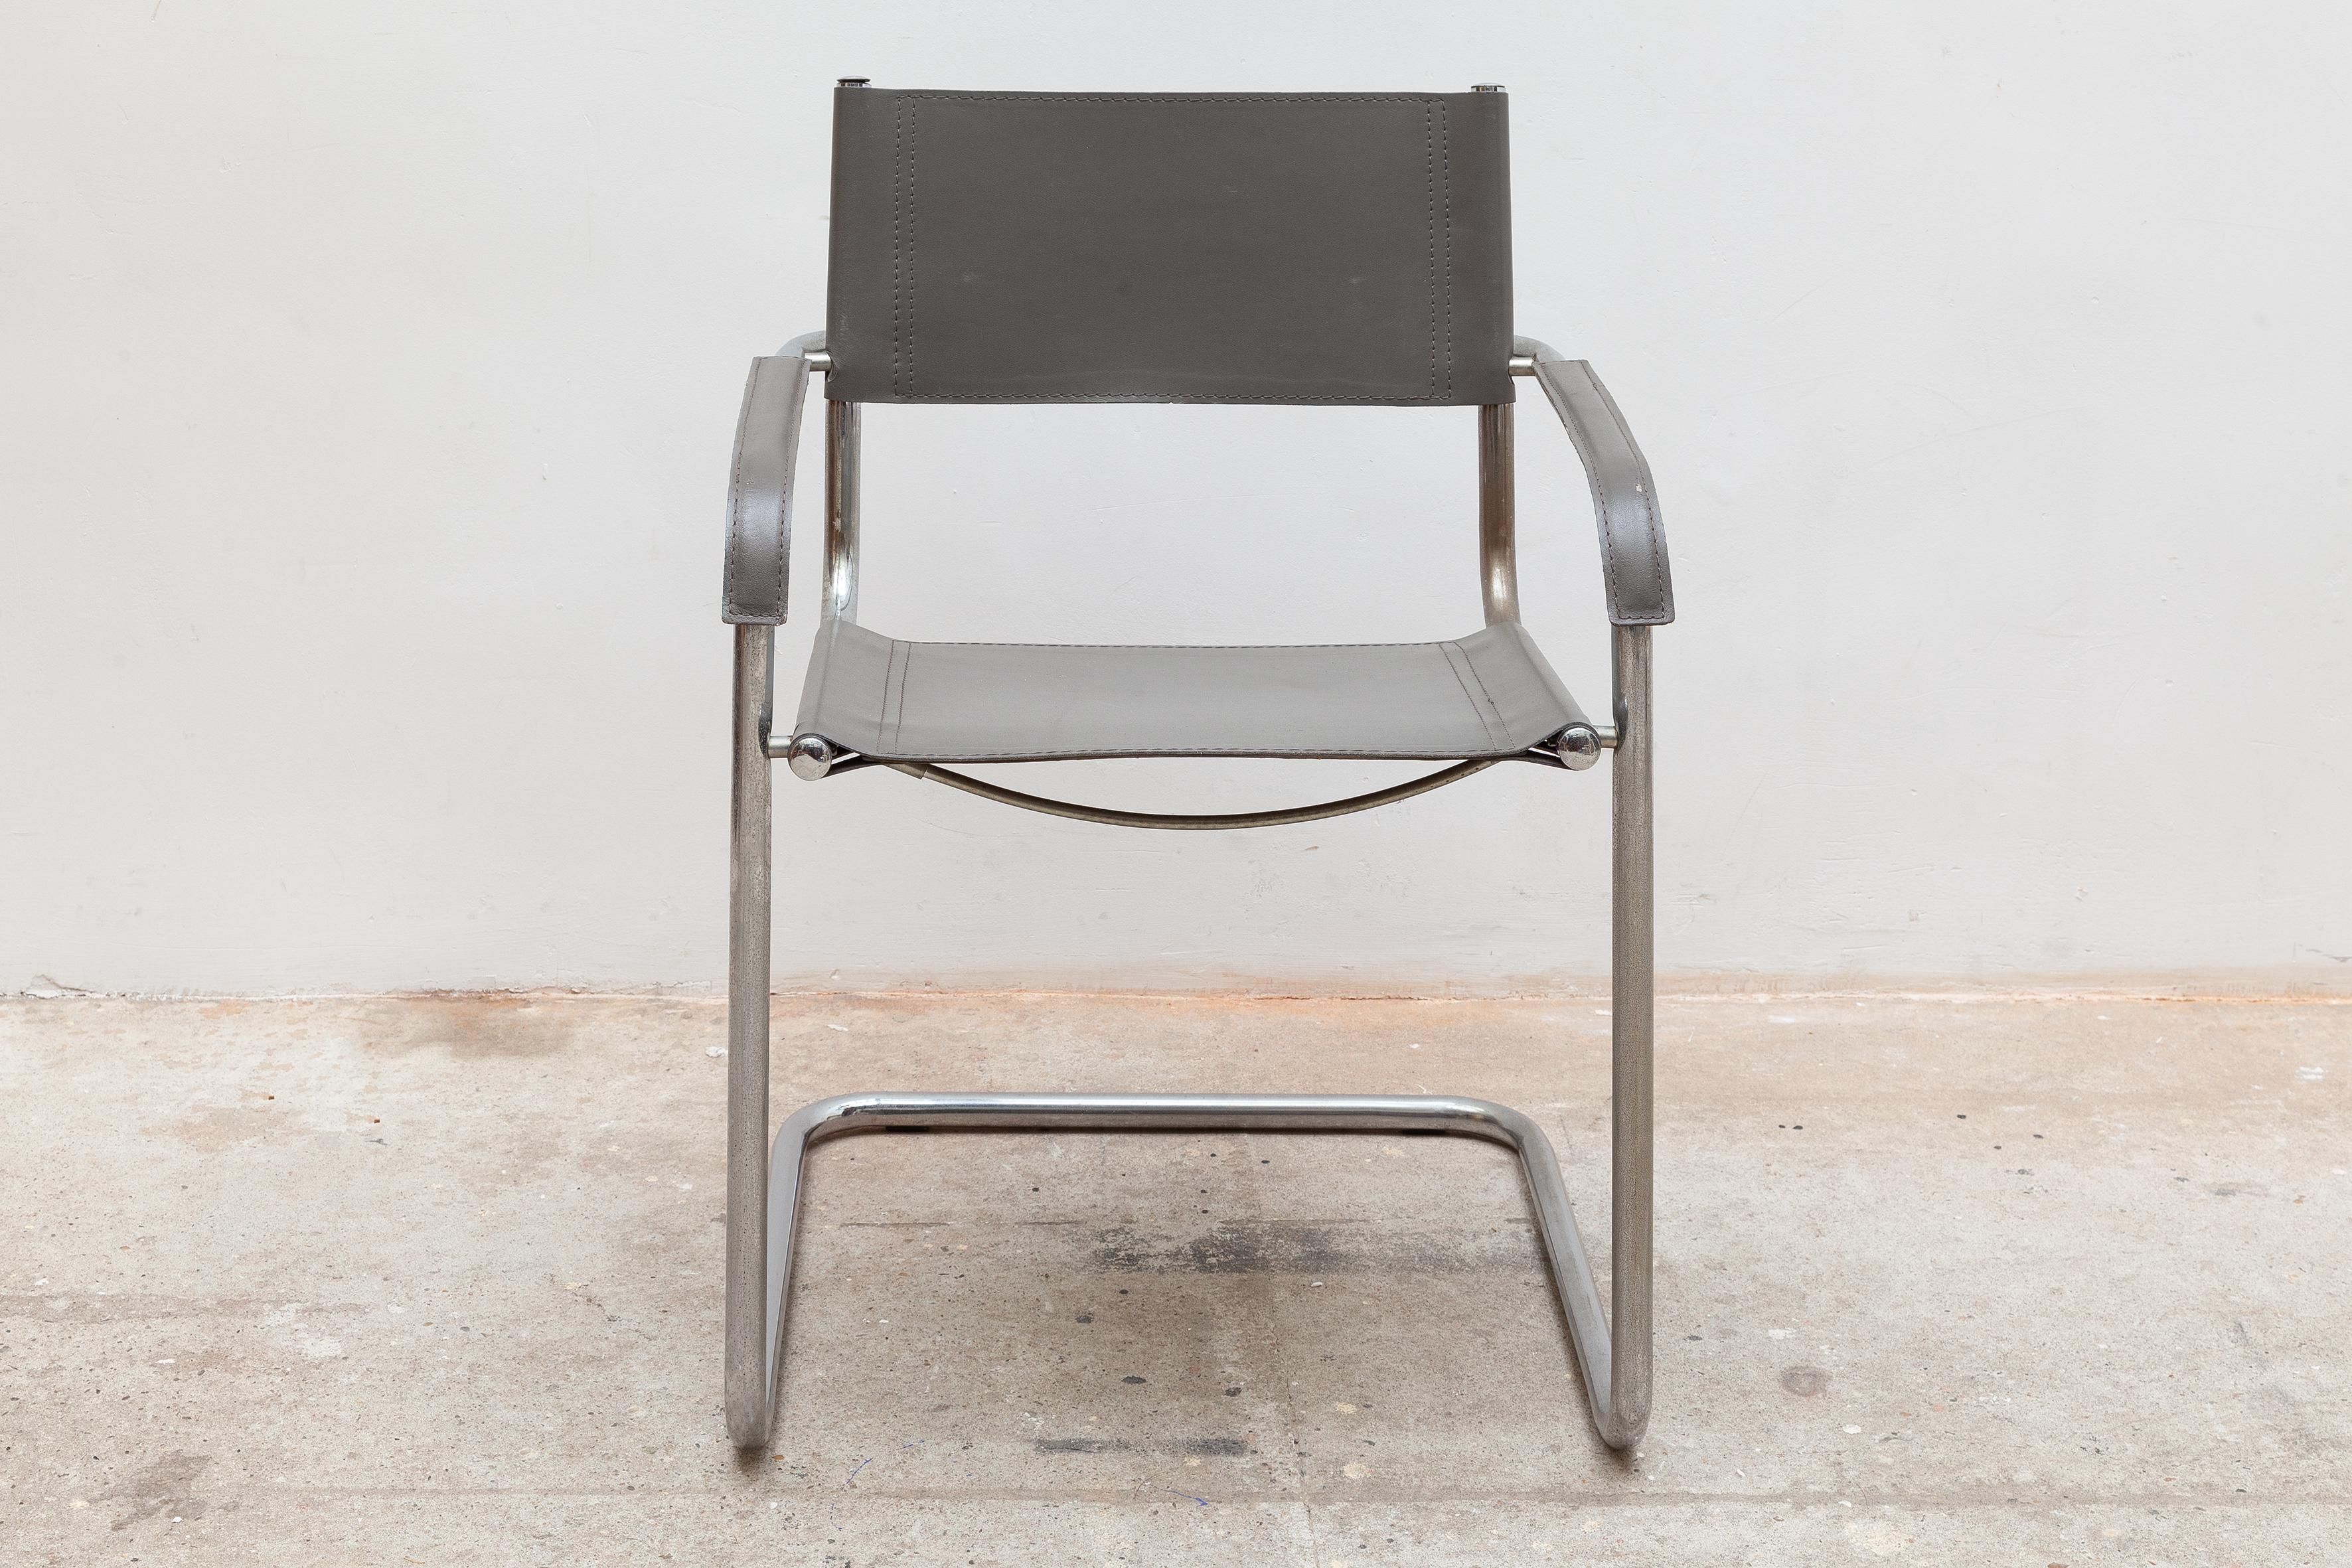 Vintage “S34” model chairs by Thonet. Chromed tubular steel cantilever frame with armrests. Sturdy leather upholstery, seat, backrest and armrest.
Dimensions: 56 W x 80 H x 52 D cm Seat: 47cm high, armrest high 62 cm.